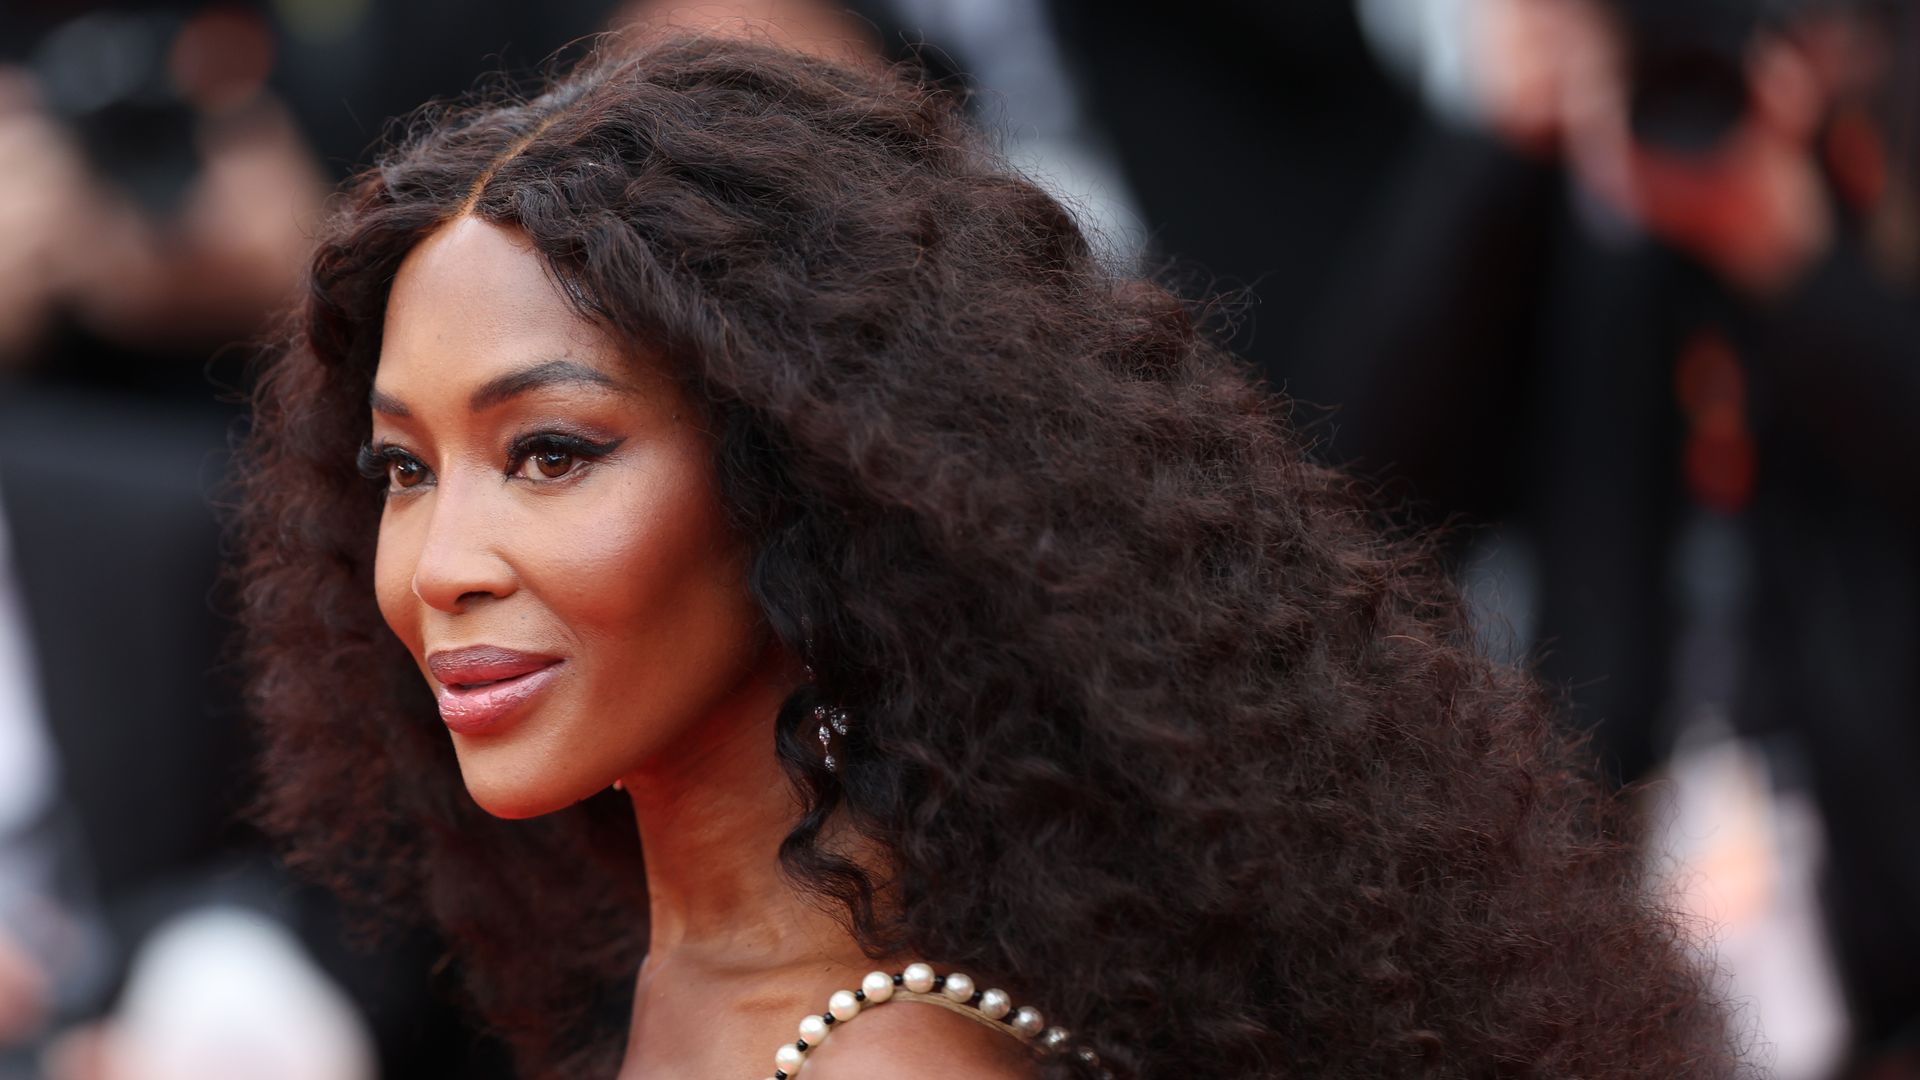 Naomi Campbell's two very rarely-seen children look so grown up in beautiful new family snaps